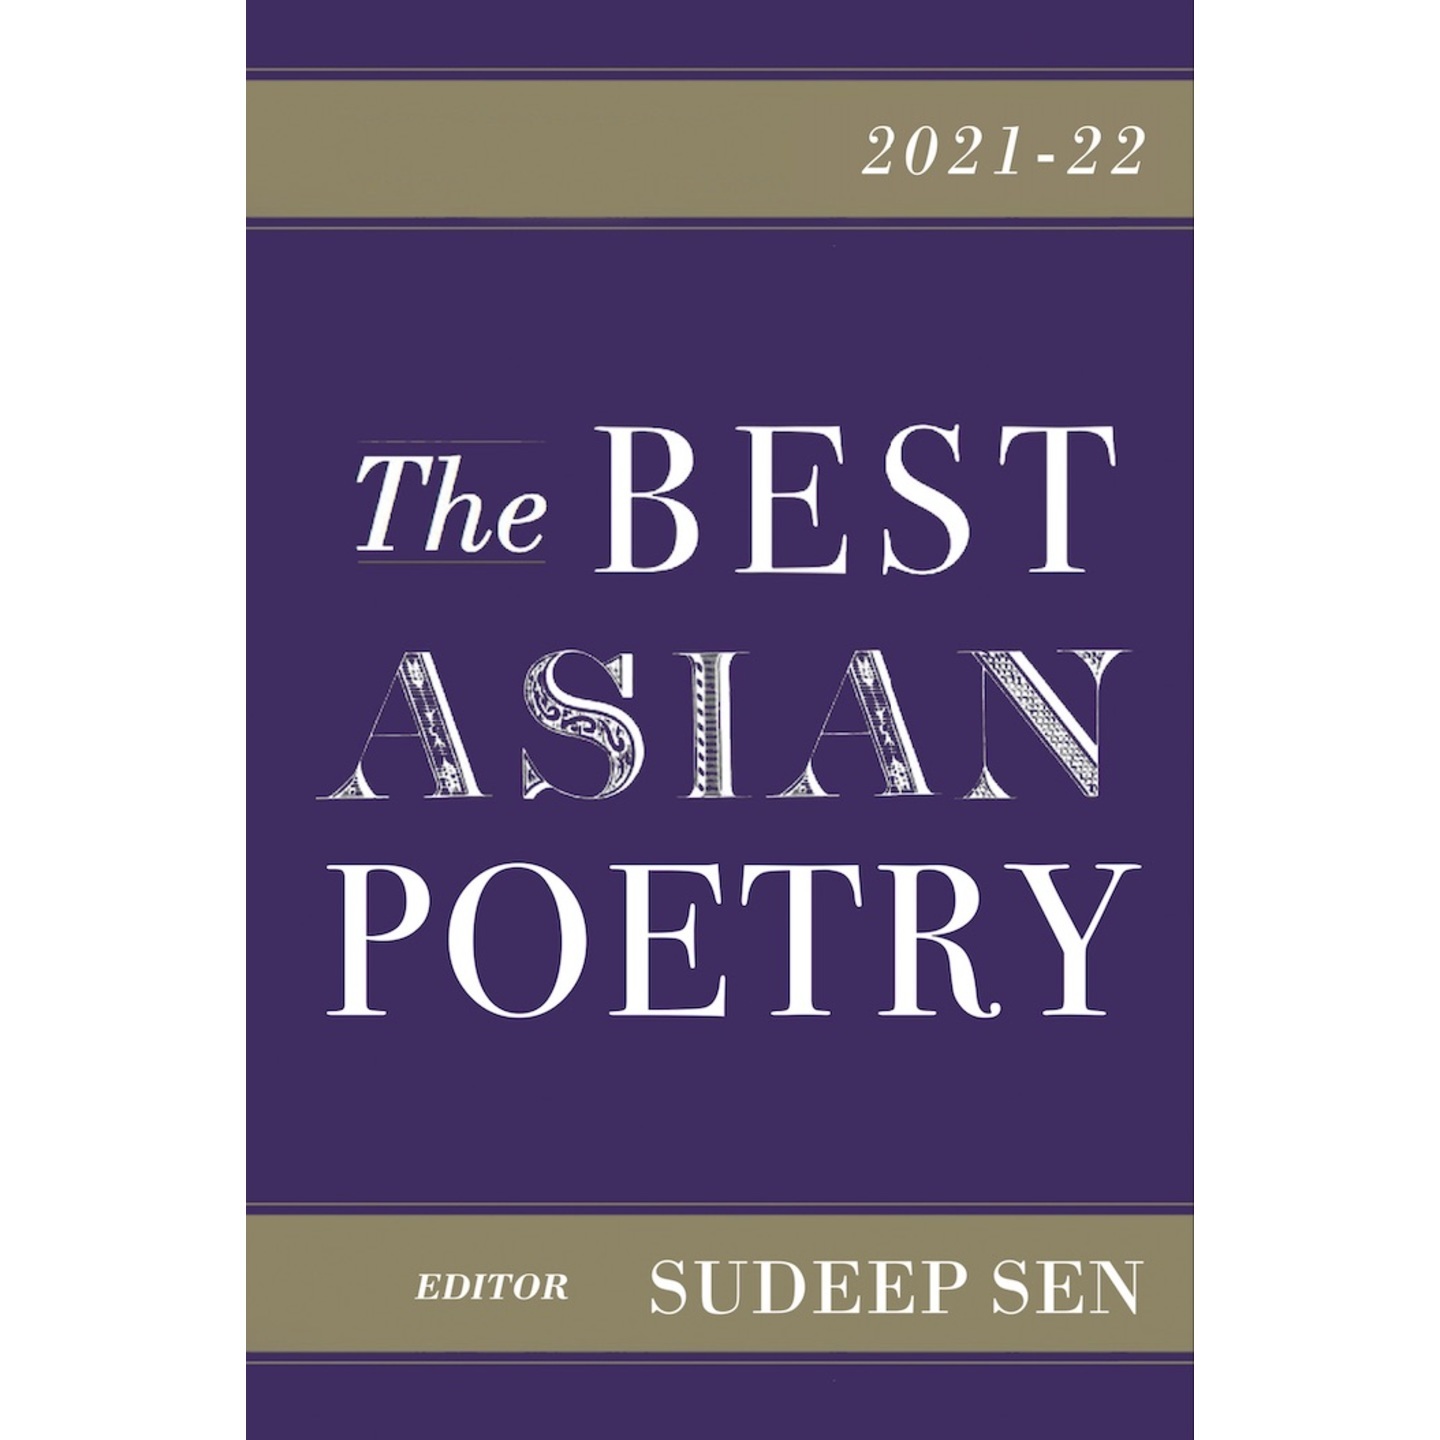 The Best Asian Poetry 2021-22 Edited by Sudeep Sen